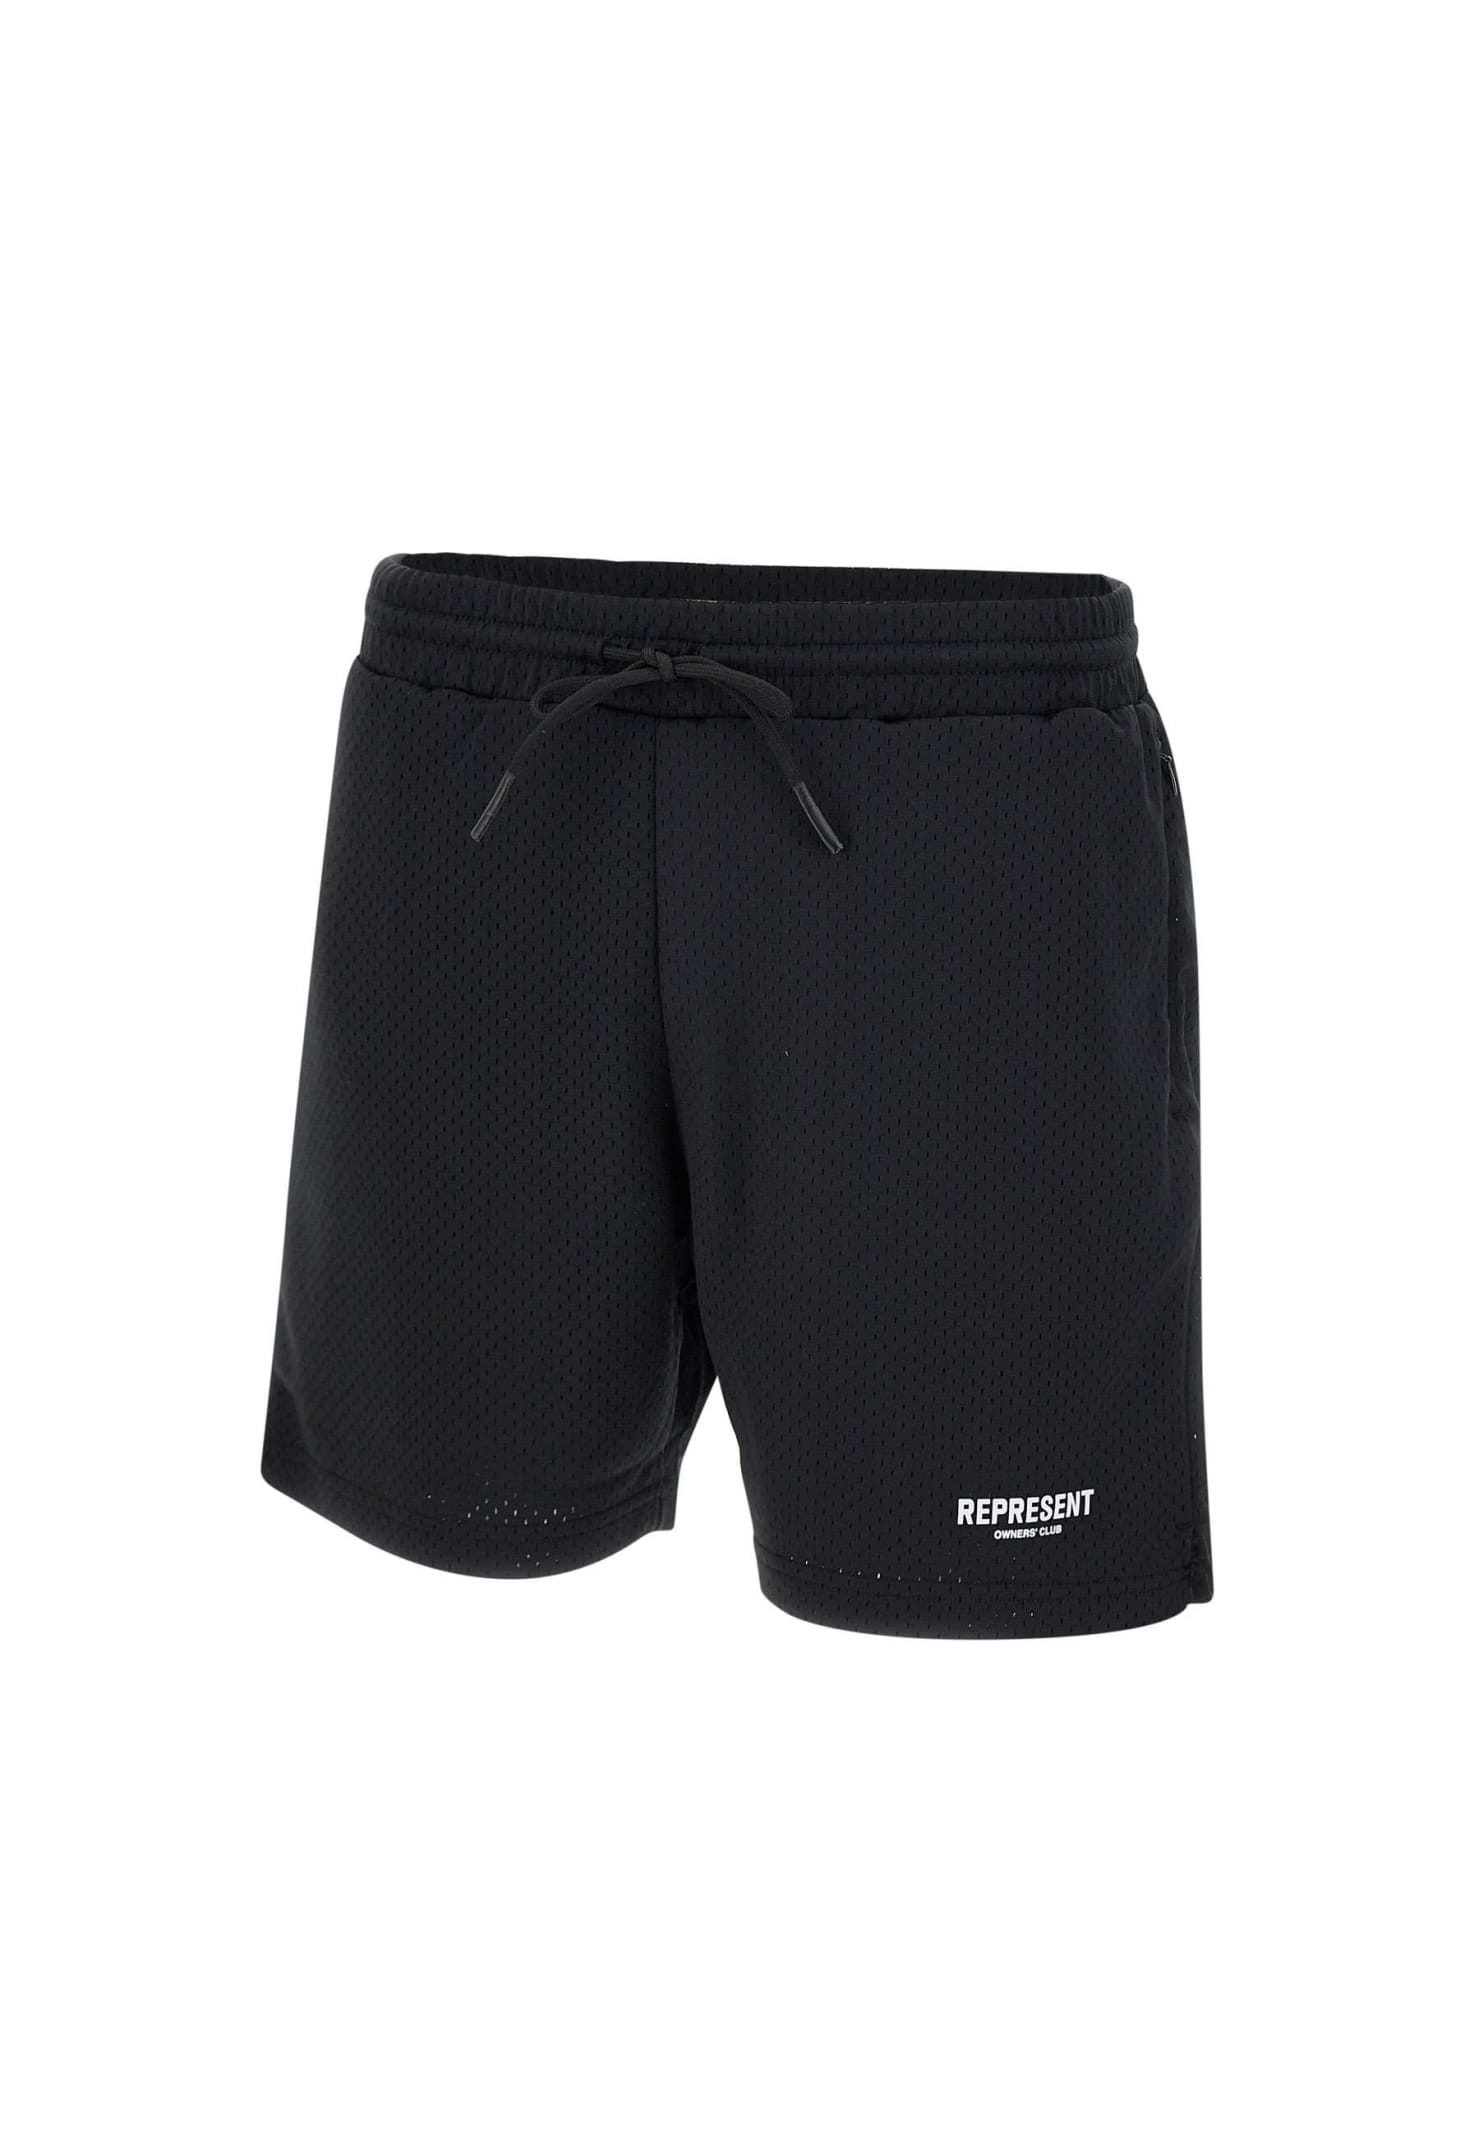 owners Club Shorts